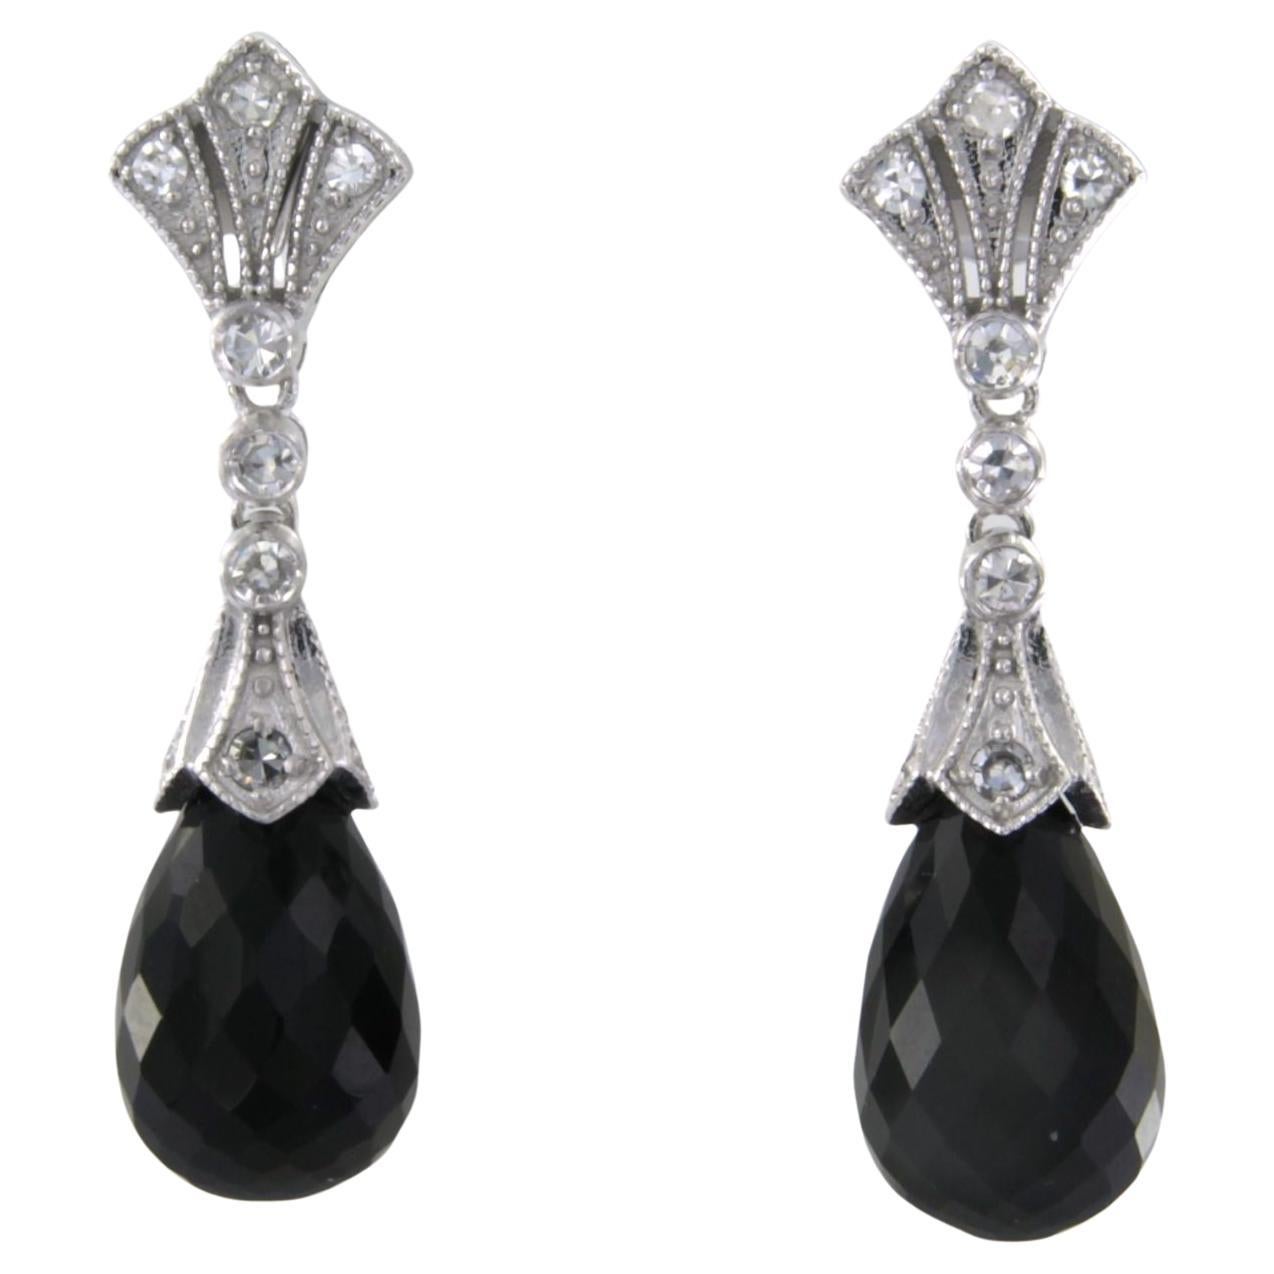 14kt white gold earrings set with onyx and single cut diamond total 0.34ct